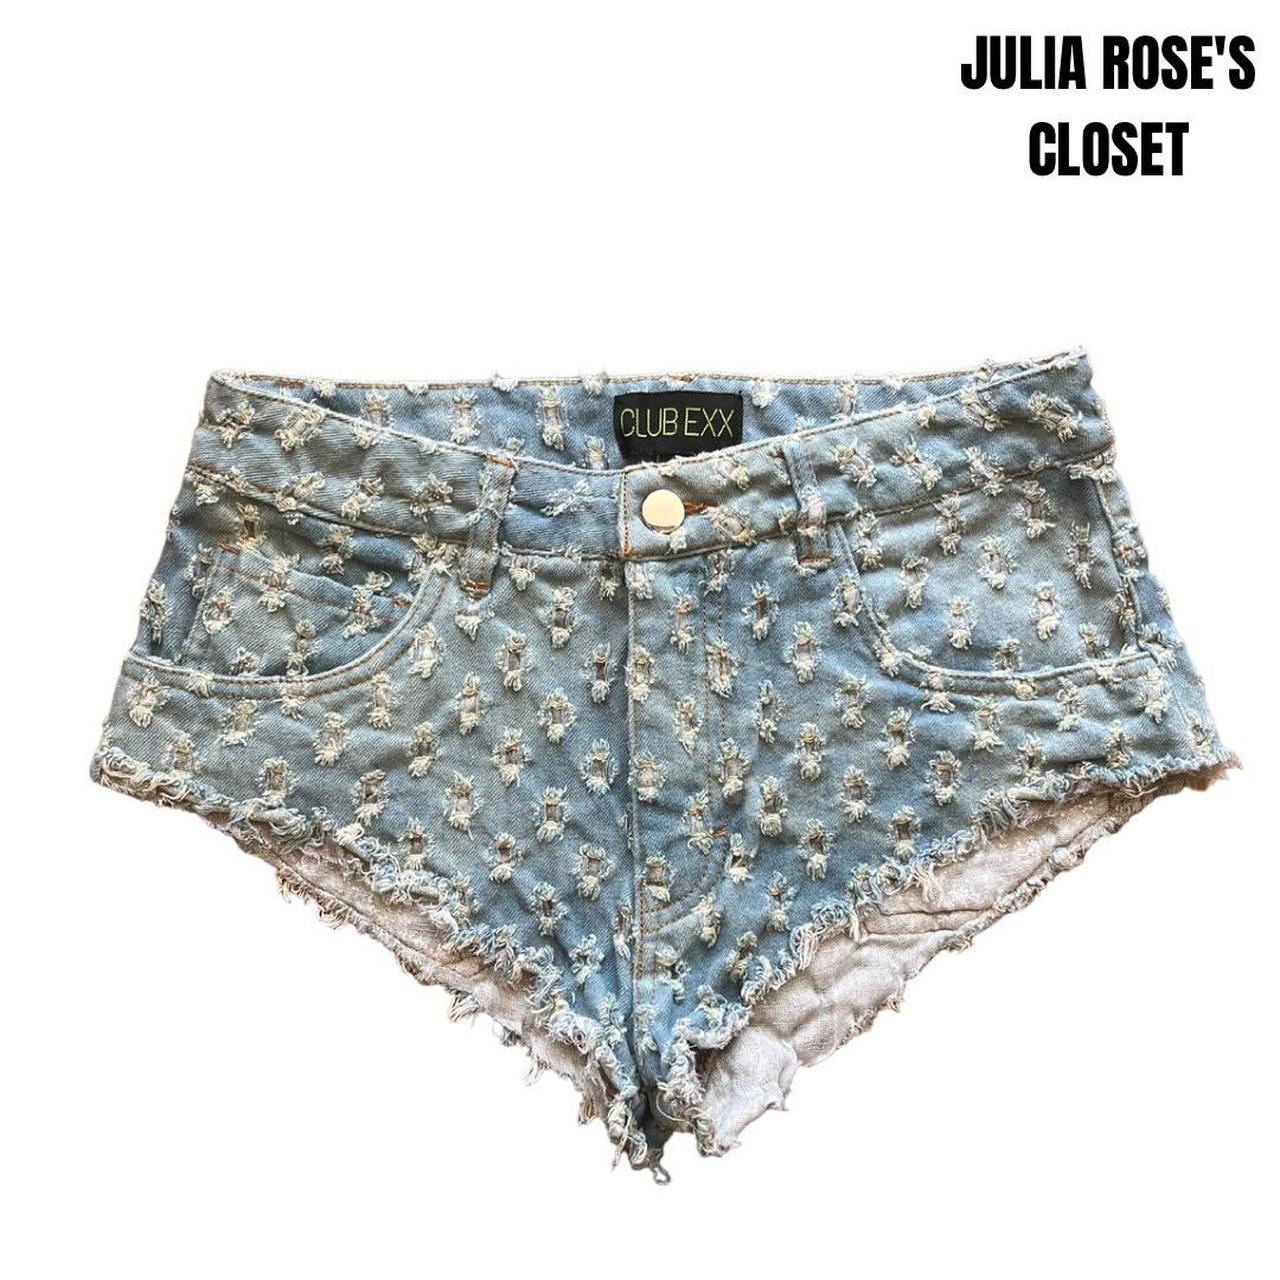 item listed by juliaroses_closet